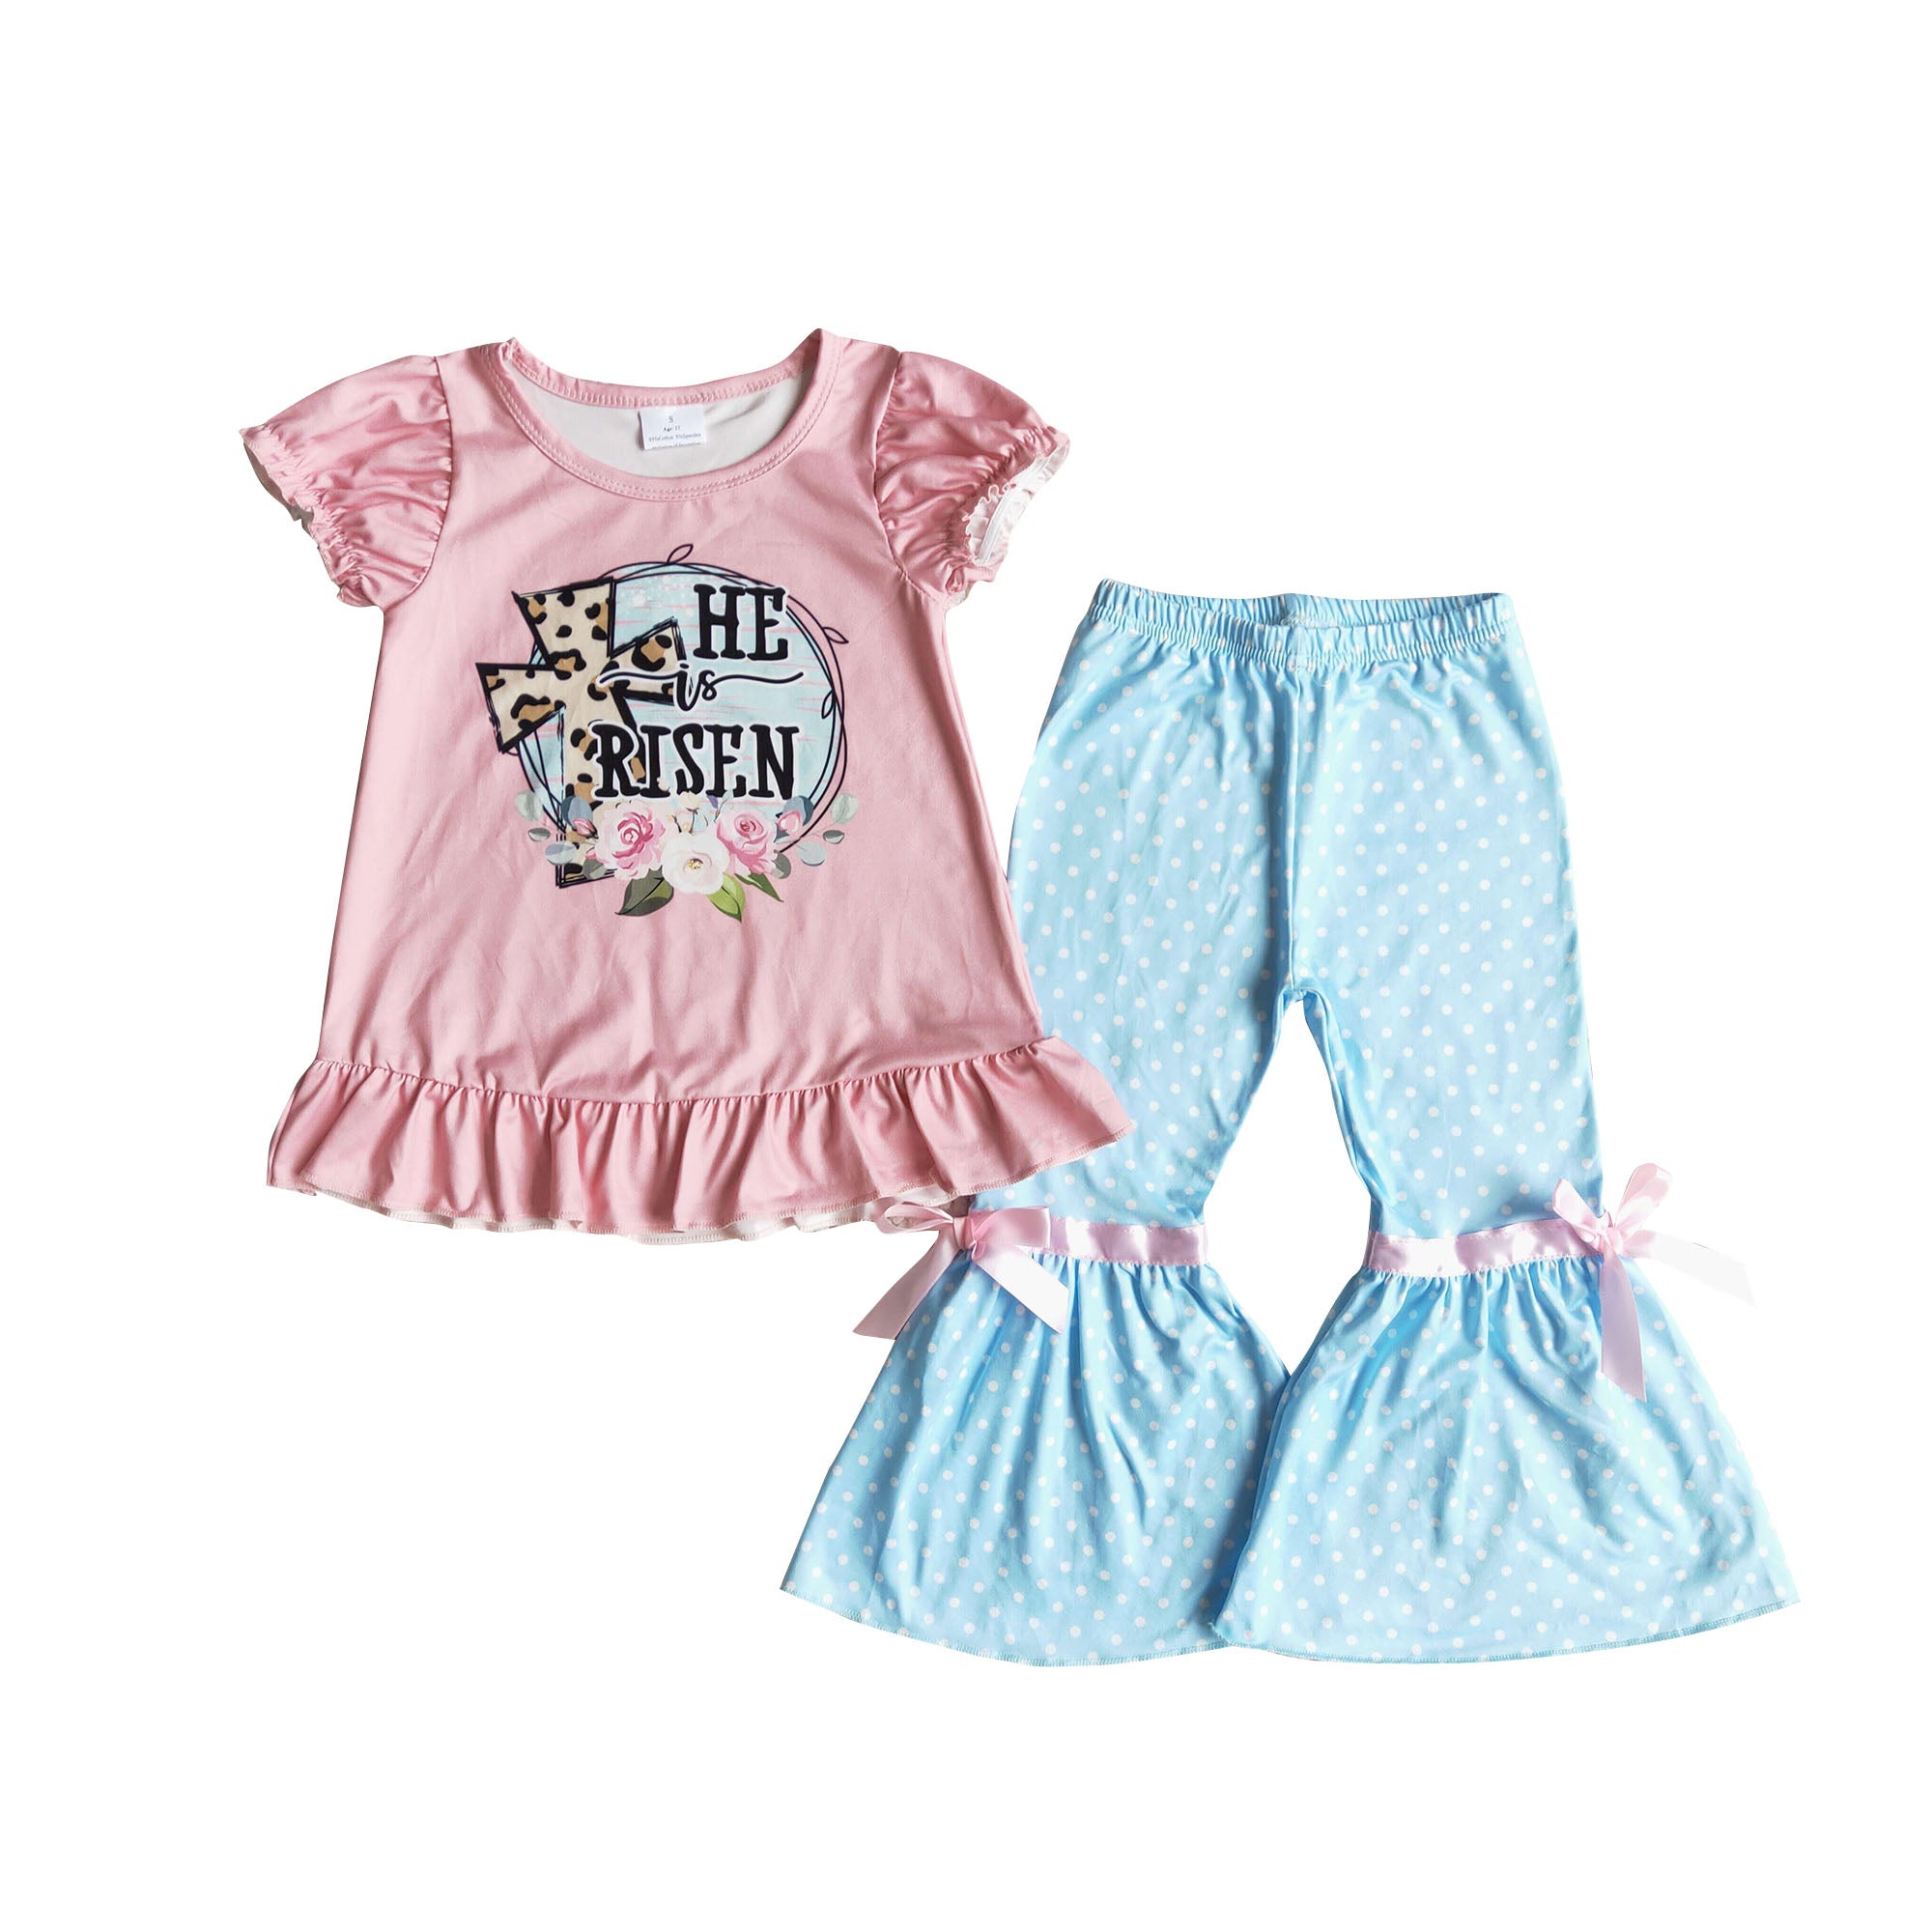 B5-25 girl clothes he is risen bell bottom set easter outfit